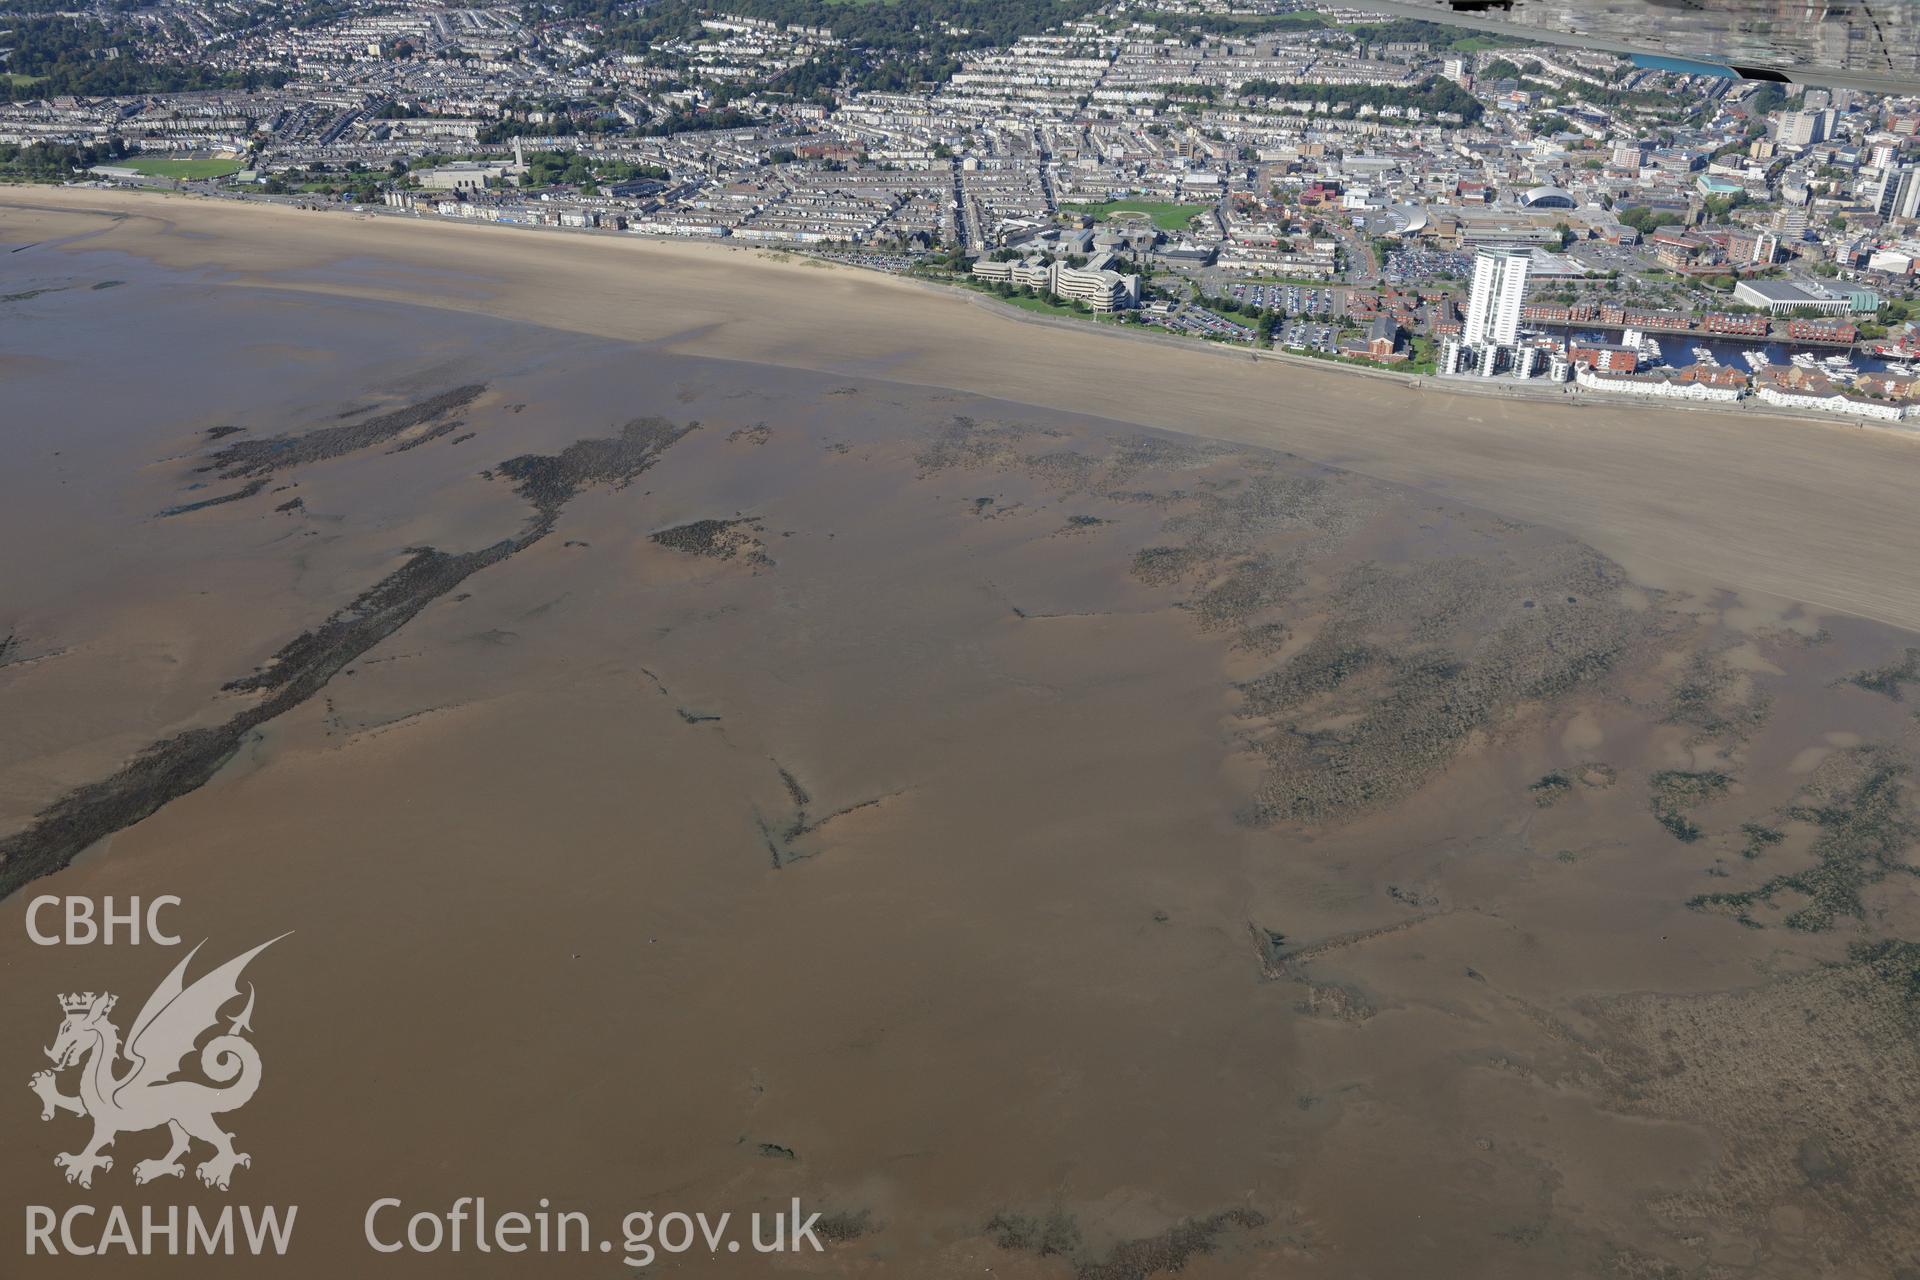 Fishtraps off Swansea bay, with the County Hall, Meridian Quay Development and Swansea city beyond. Oblique aerial photograph taken during the Royal Commission's programme of archaeological aerial reconnaissance by Toby Driver on 30th September 2015.